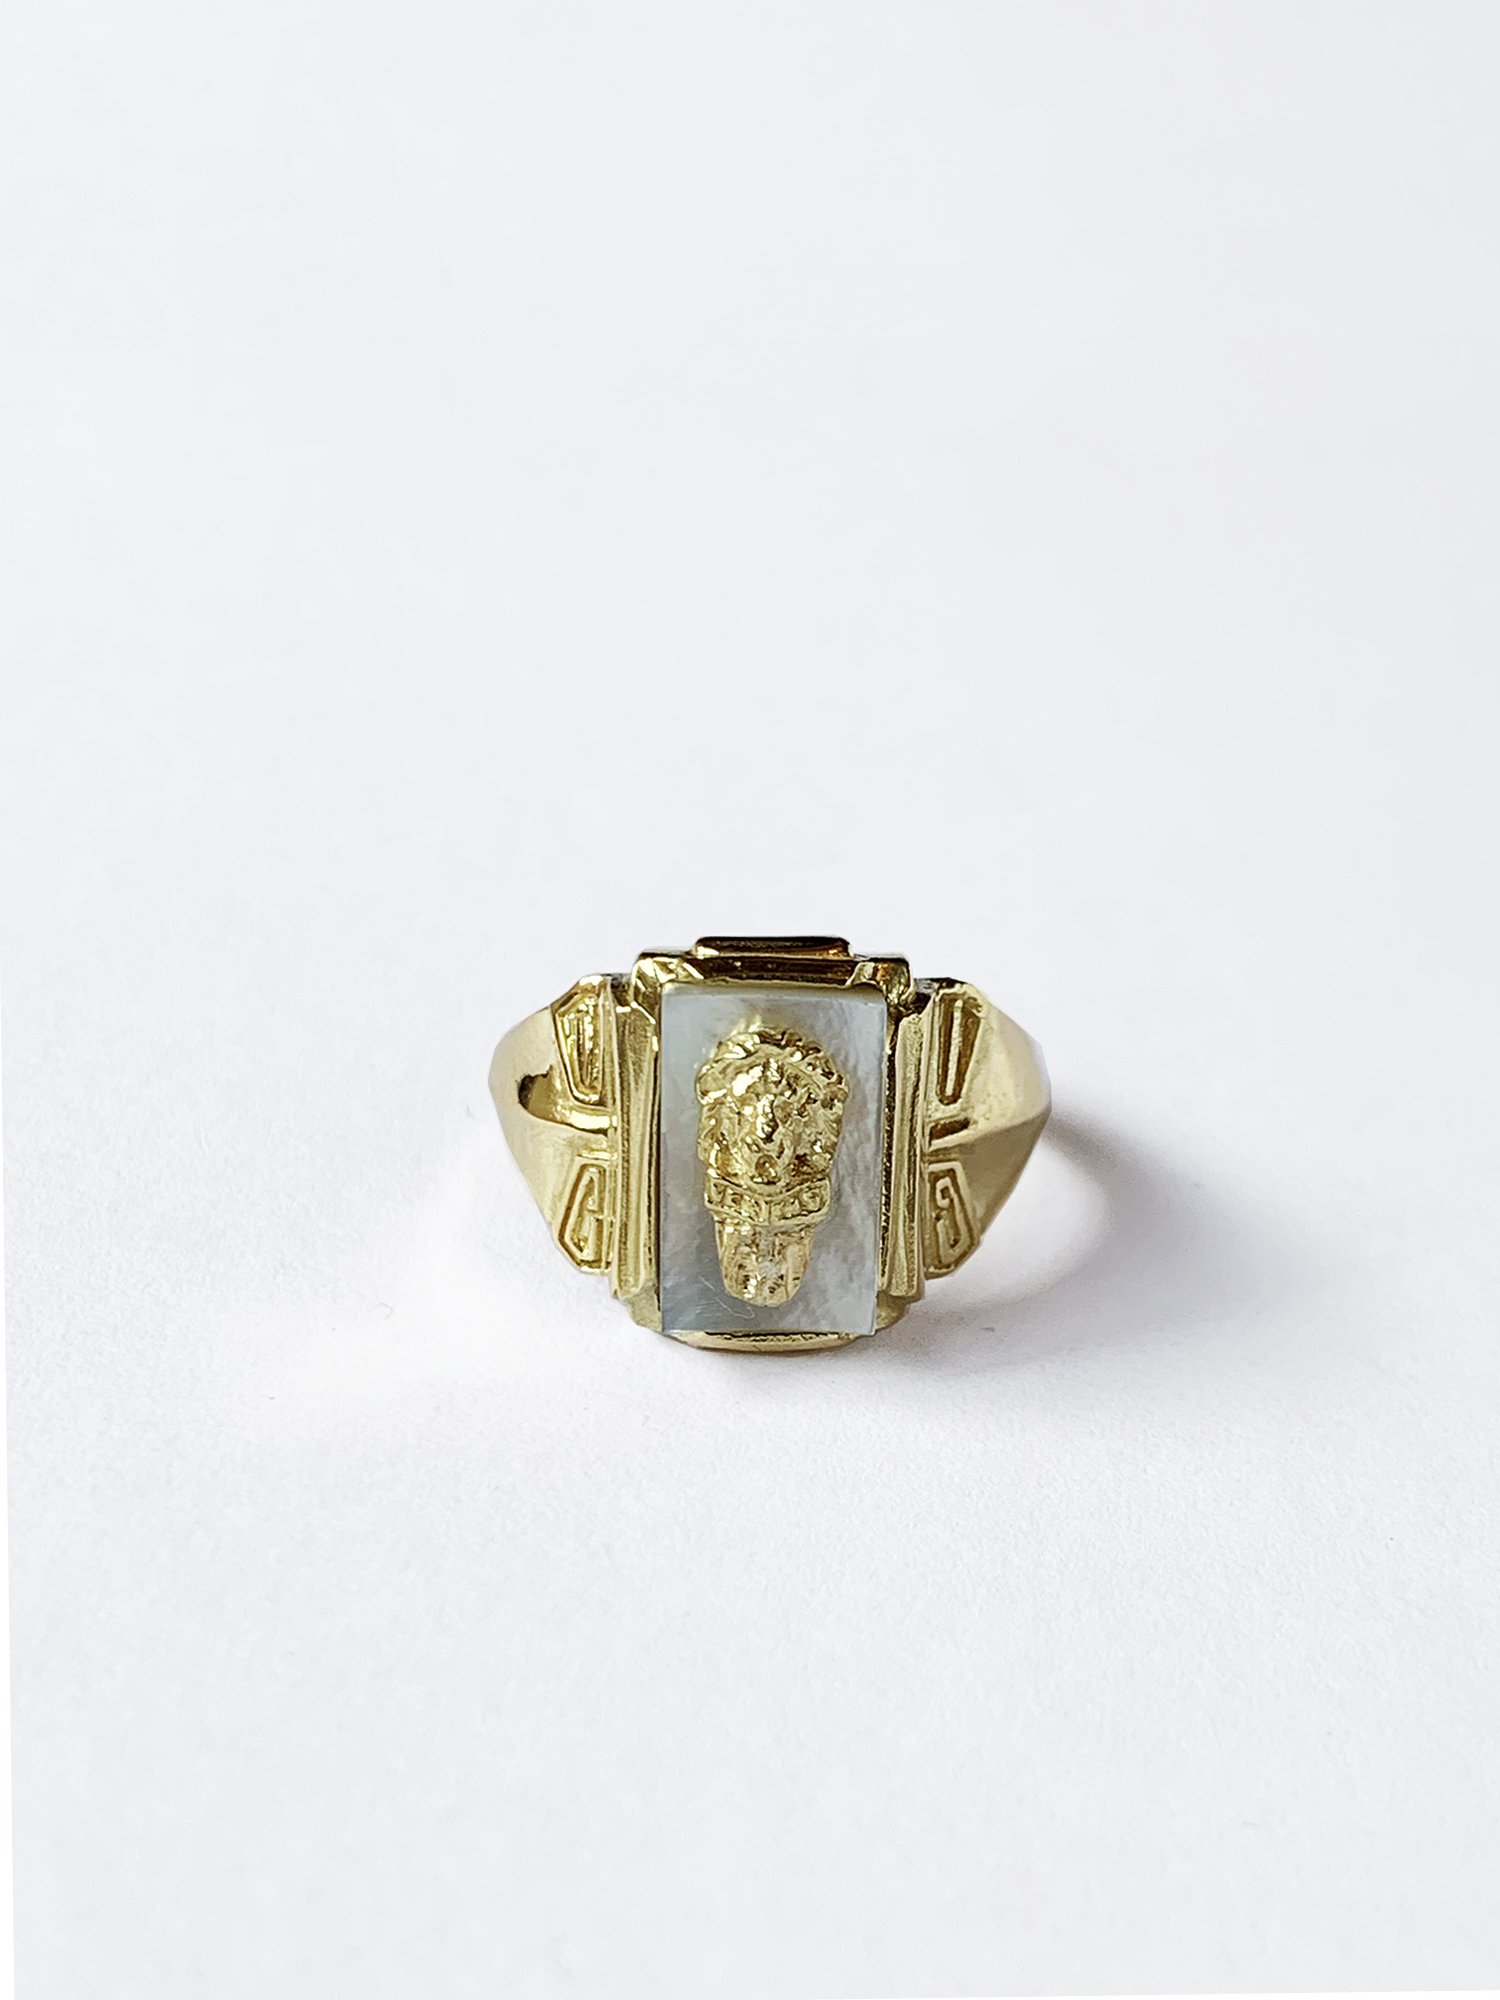 HELIOS / College leo ring / Mother of pearl / 12 / ߸˾